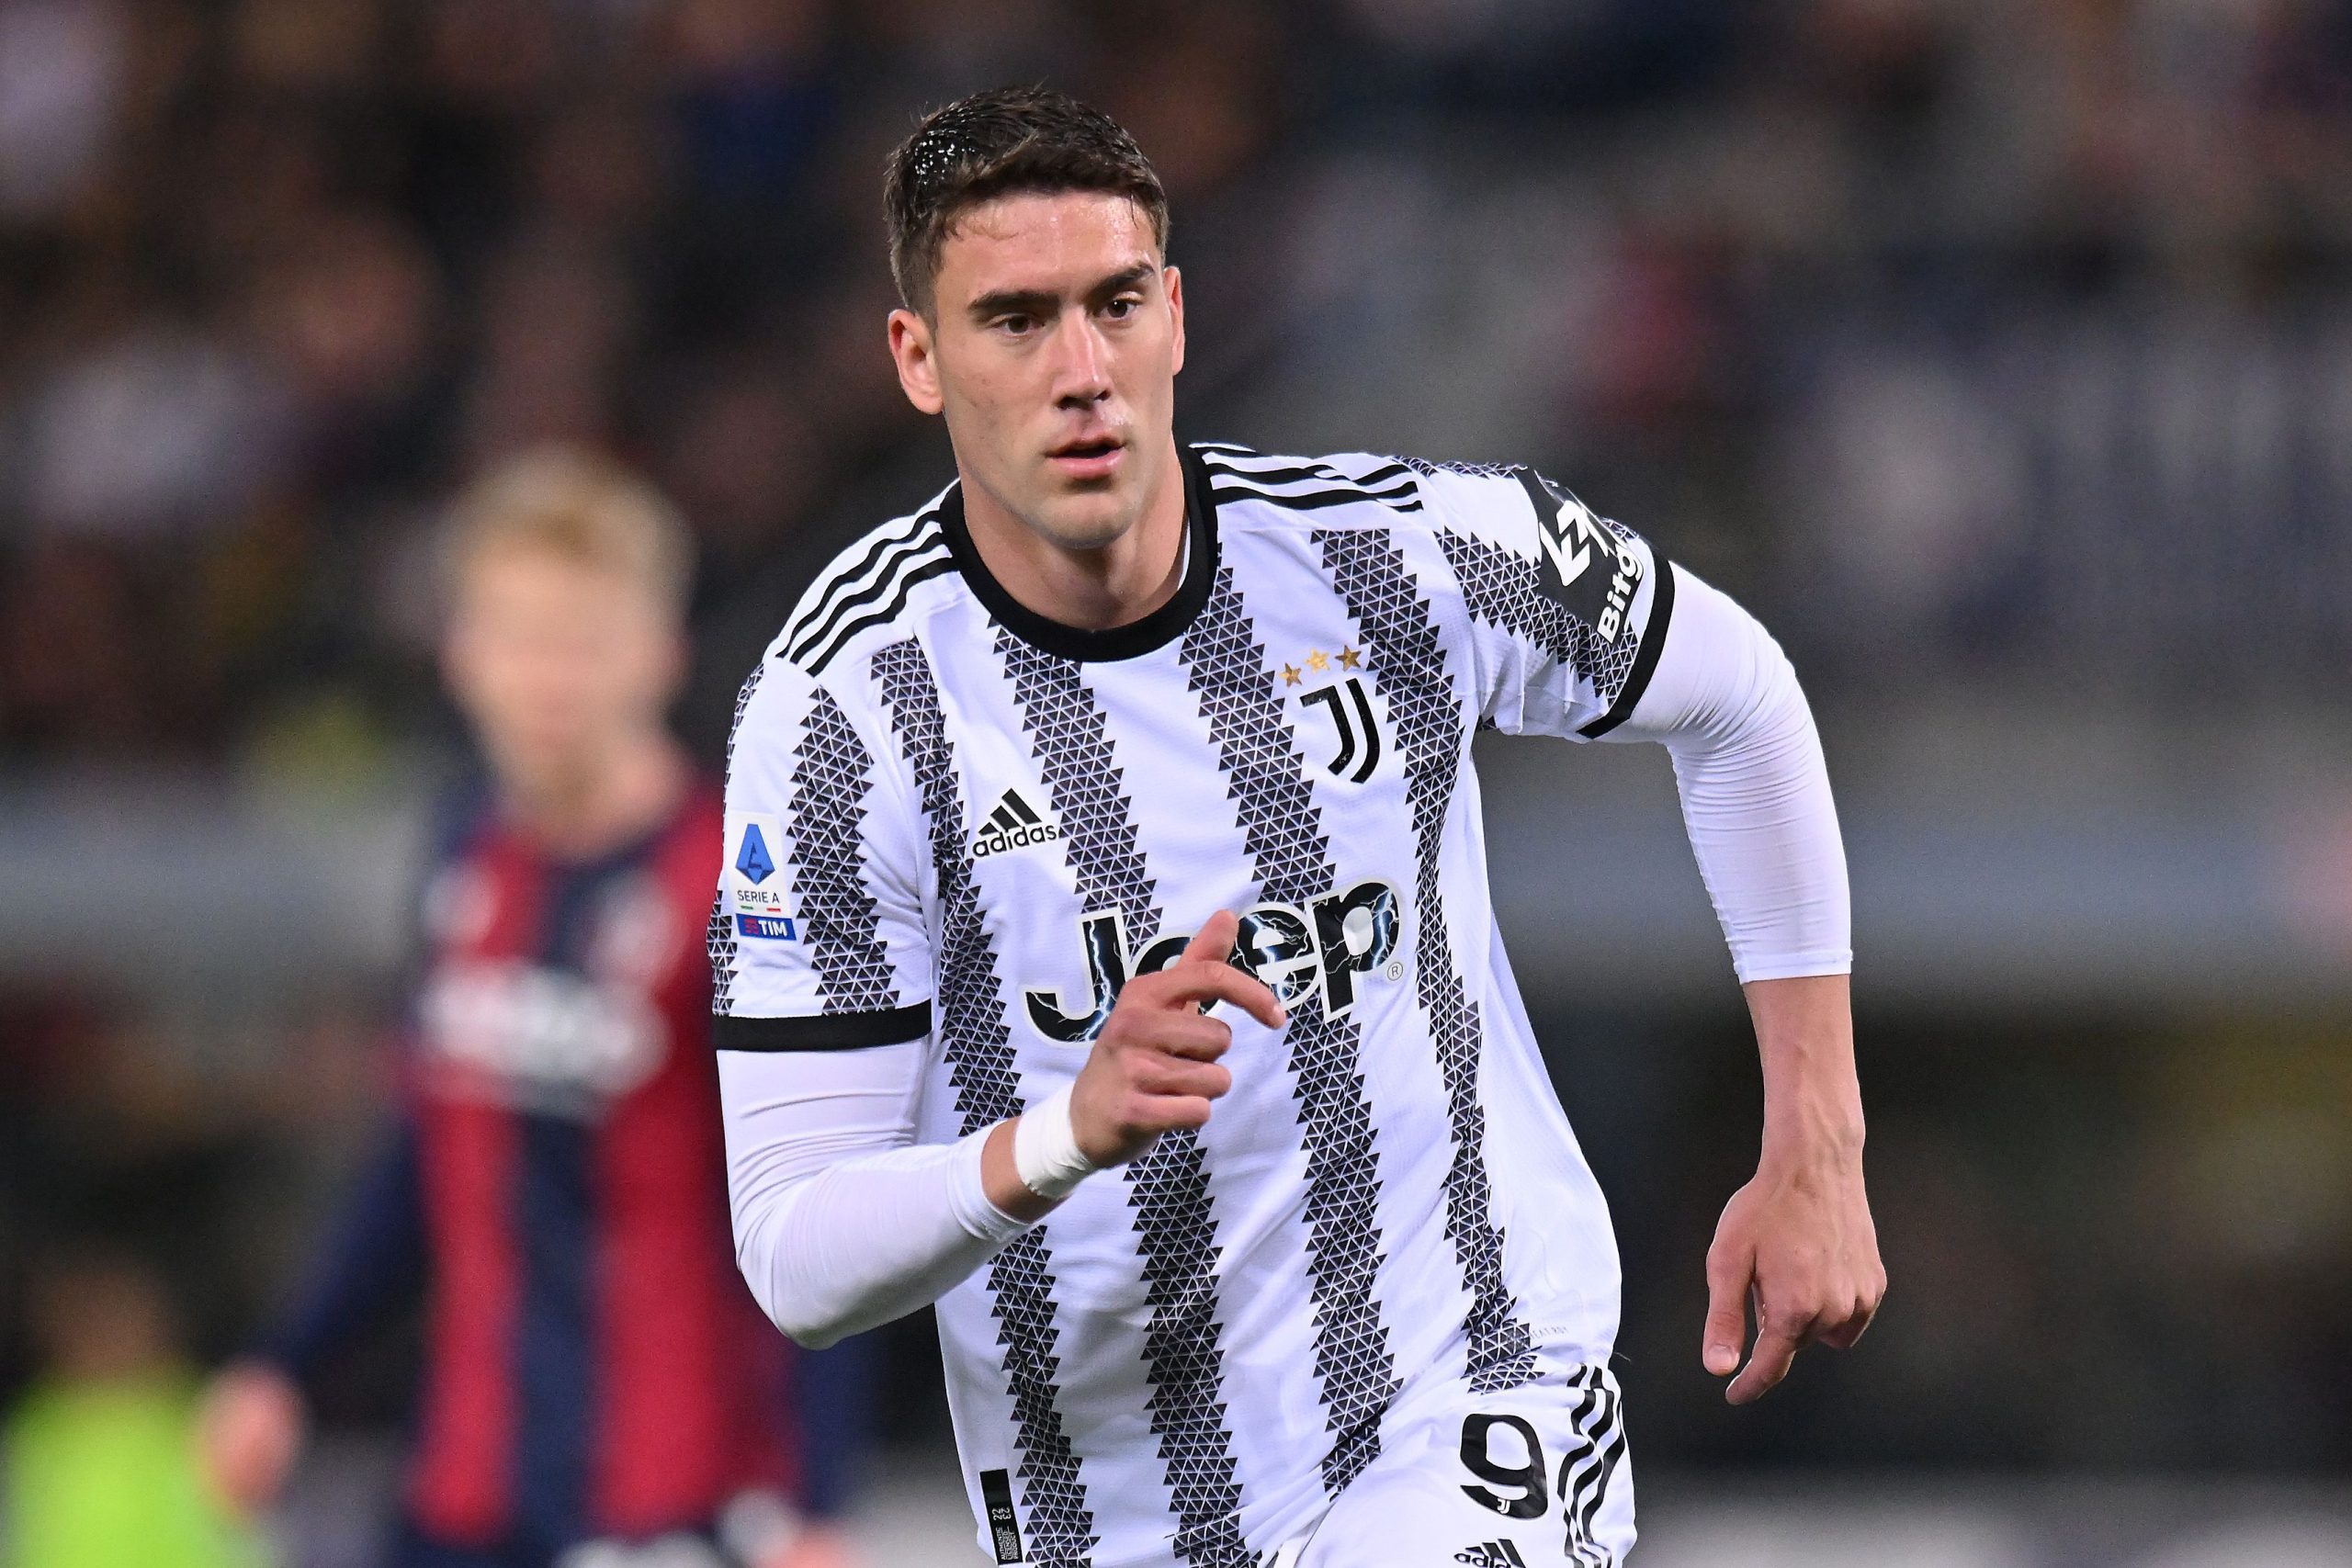 Juventus star and Chelsea summer target Dusan Vlahovic is not for sale.